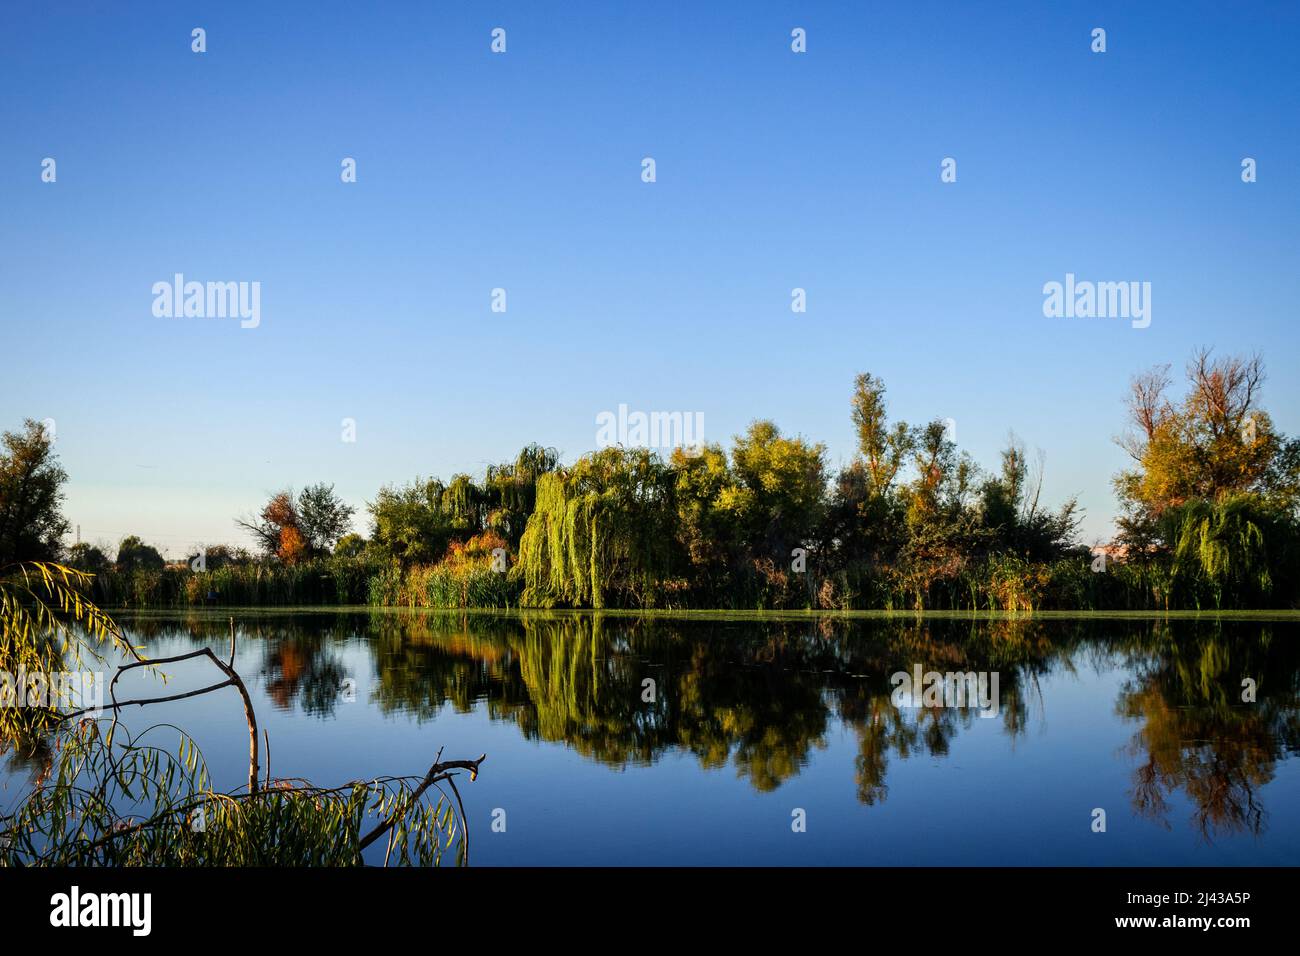 Perfectly reflected willow trees on a still lake used for fishing and relaxing Stock Photo